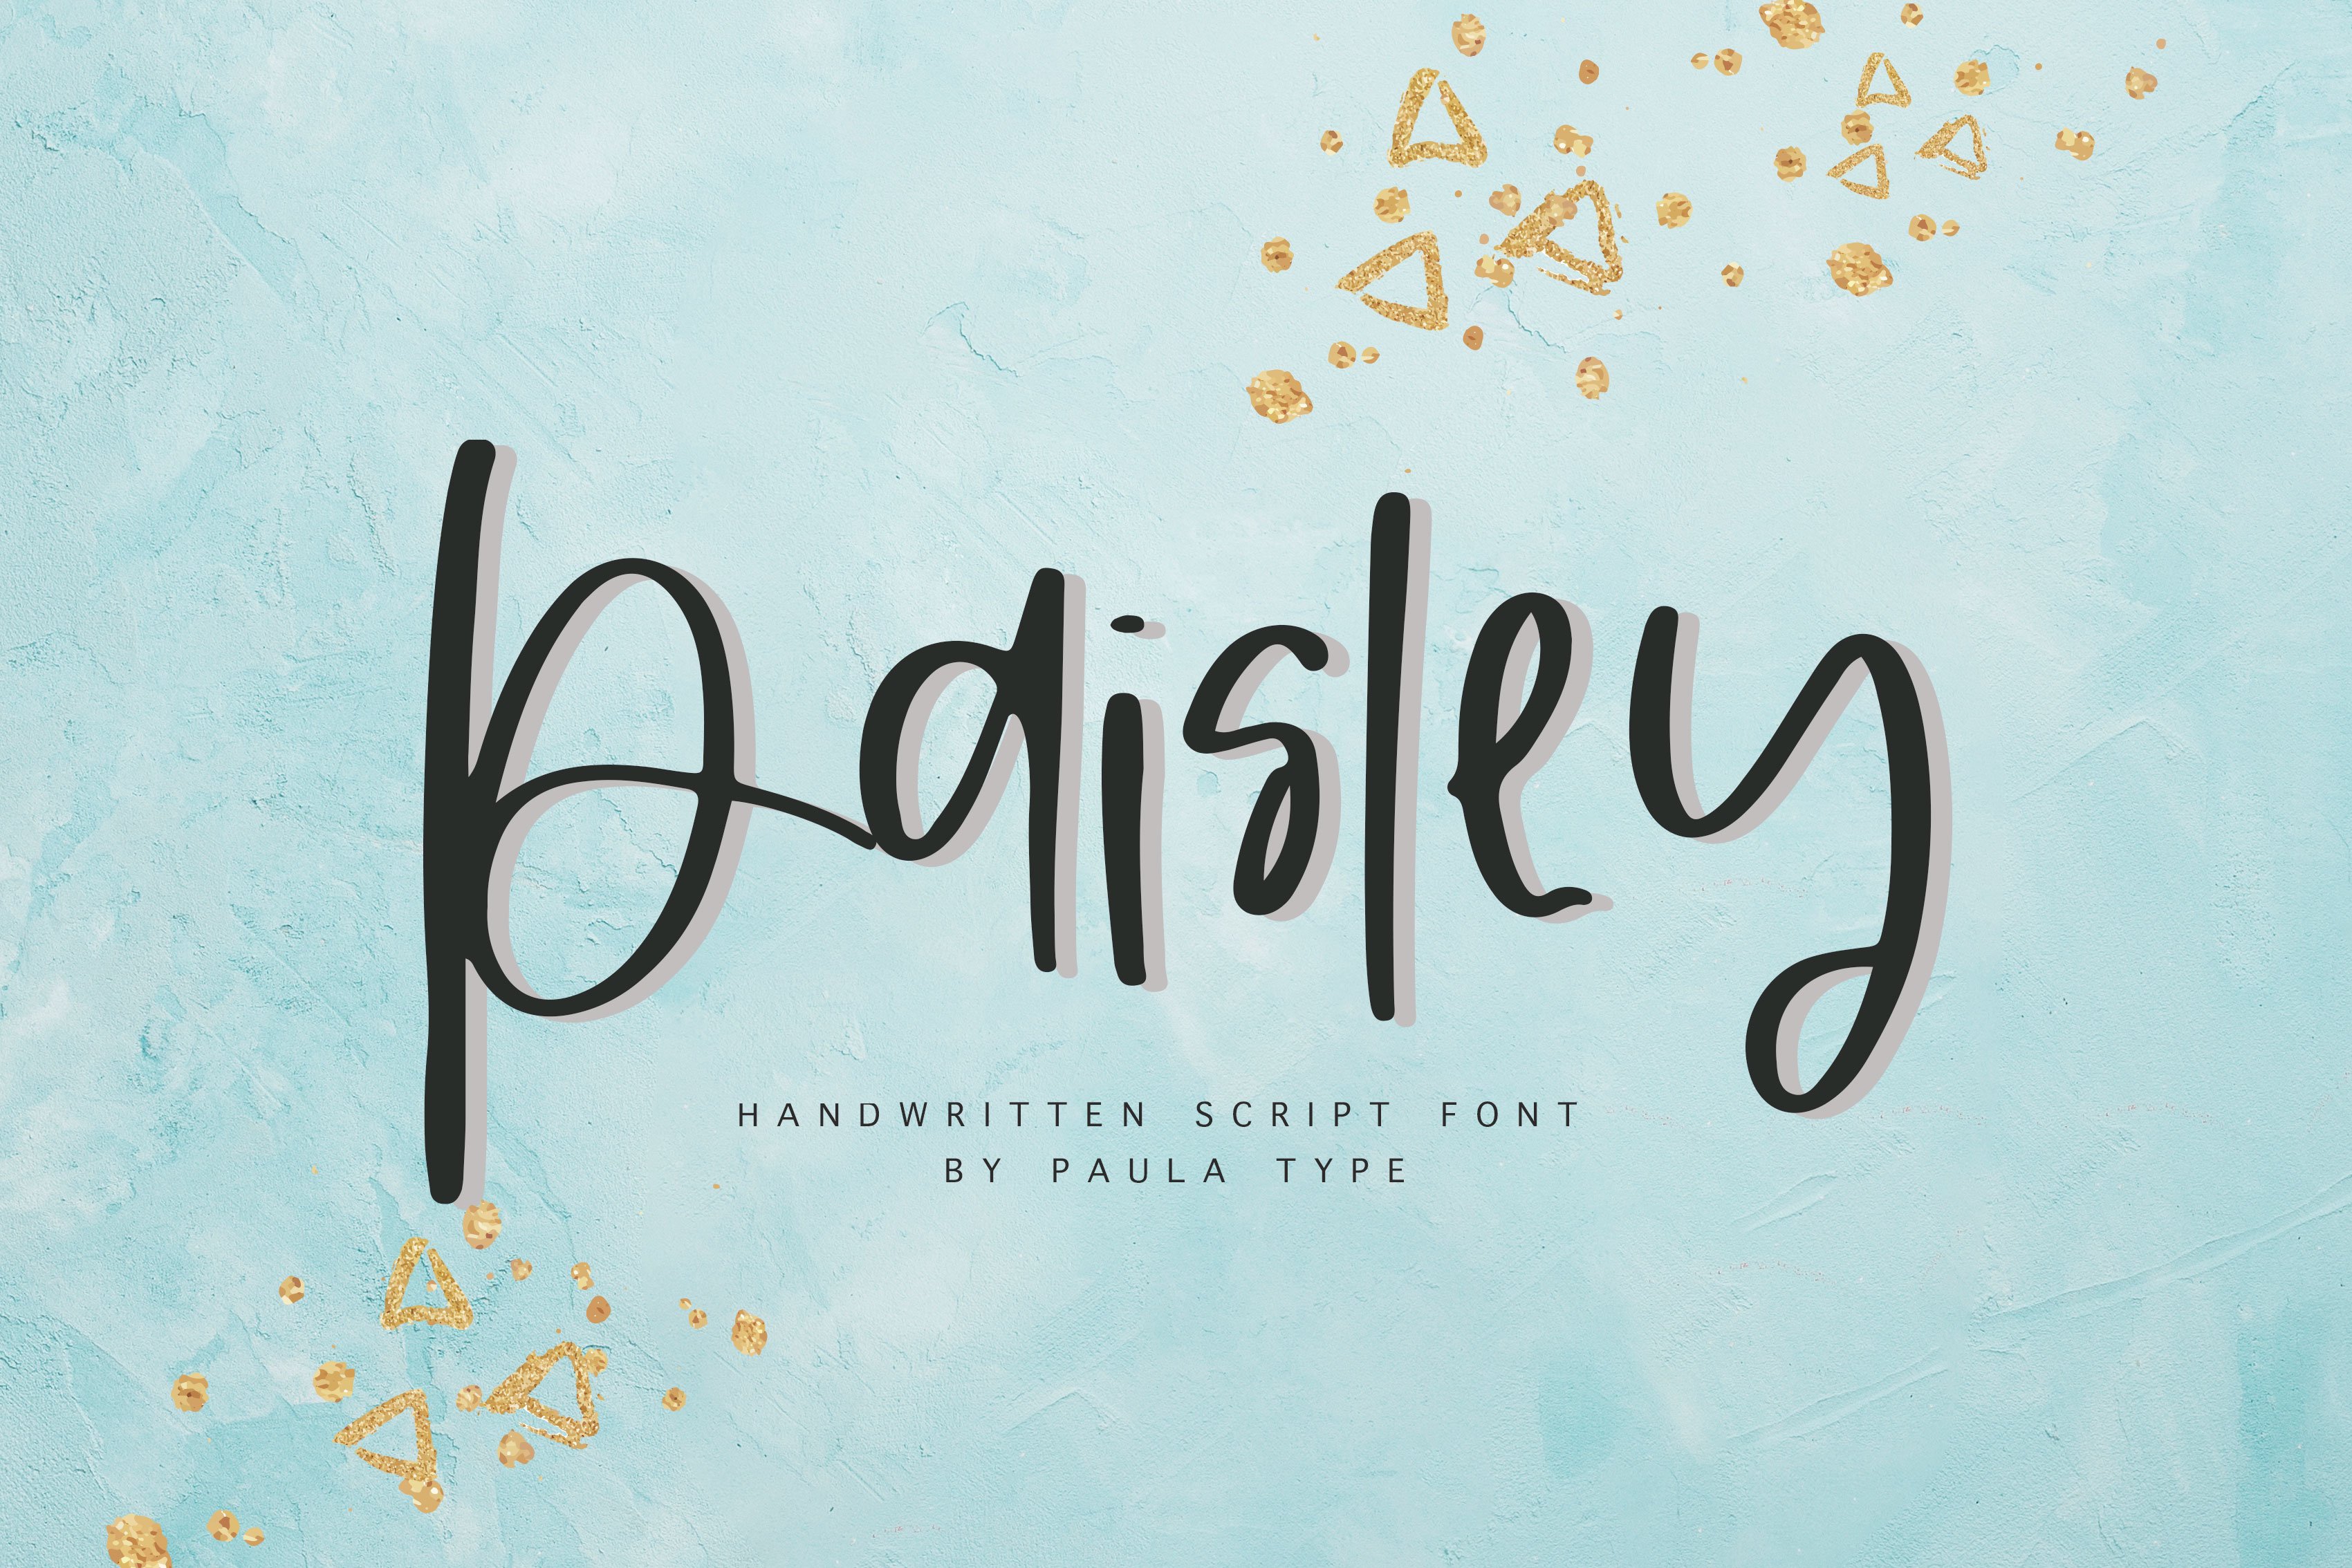 Paisley | Handwritten Font cover image.